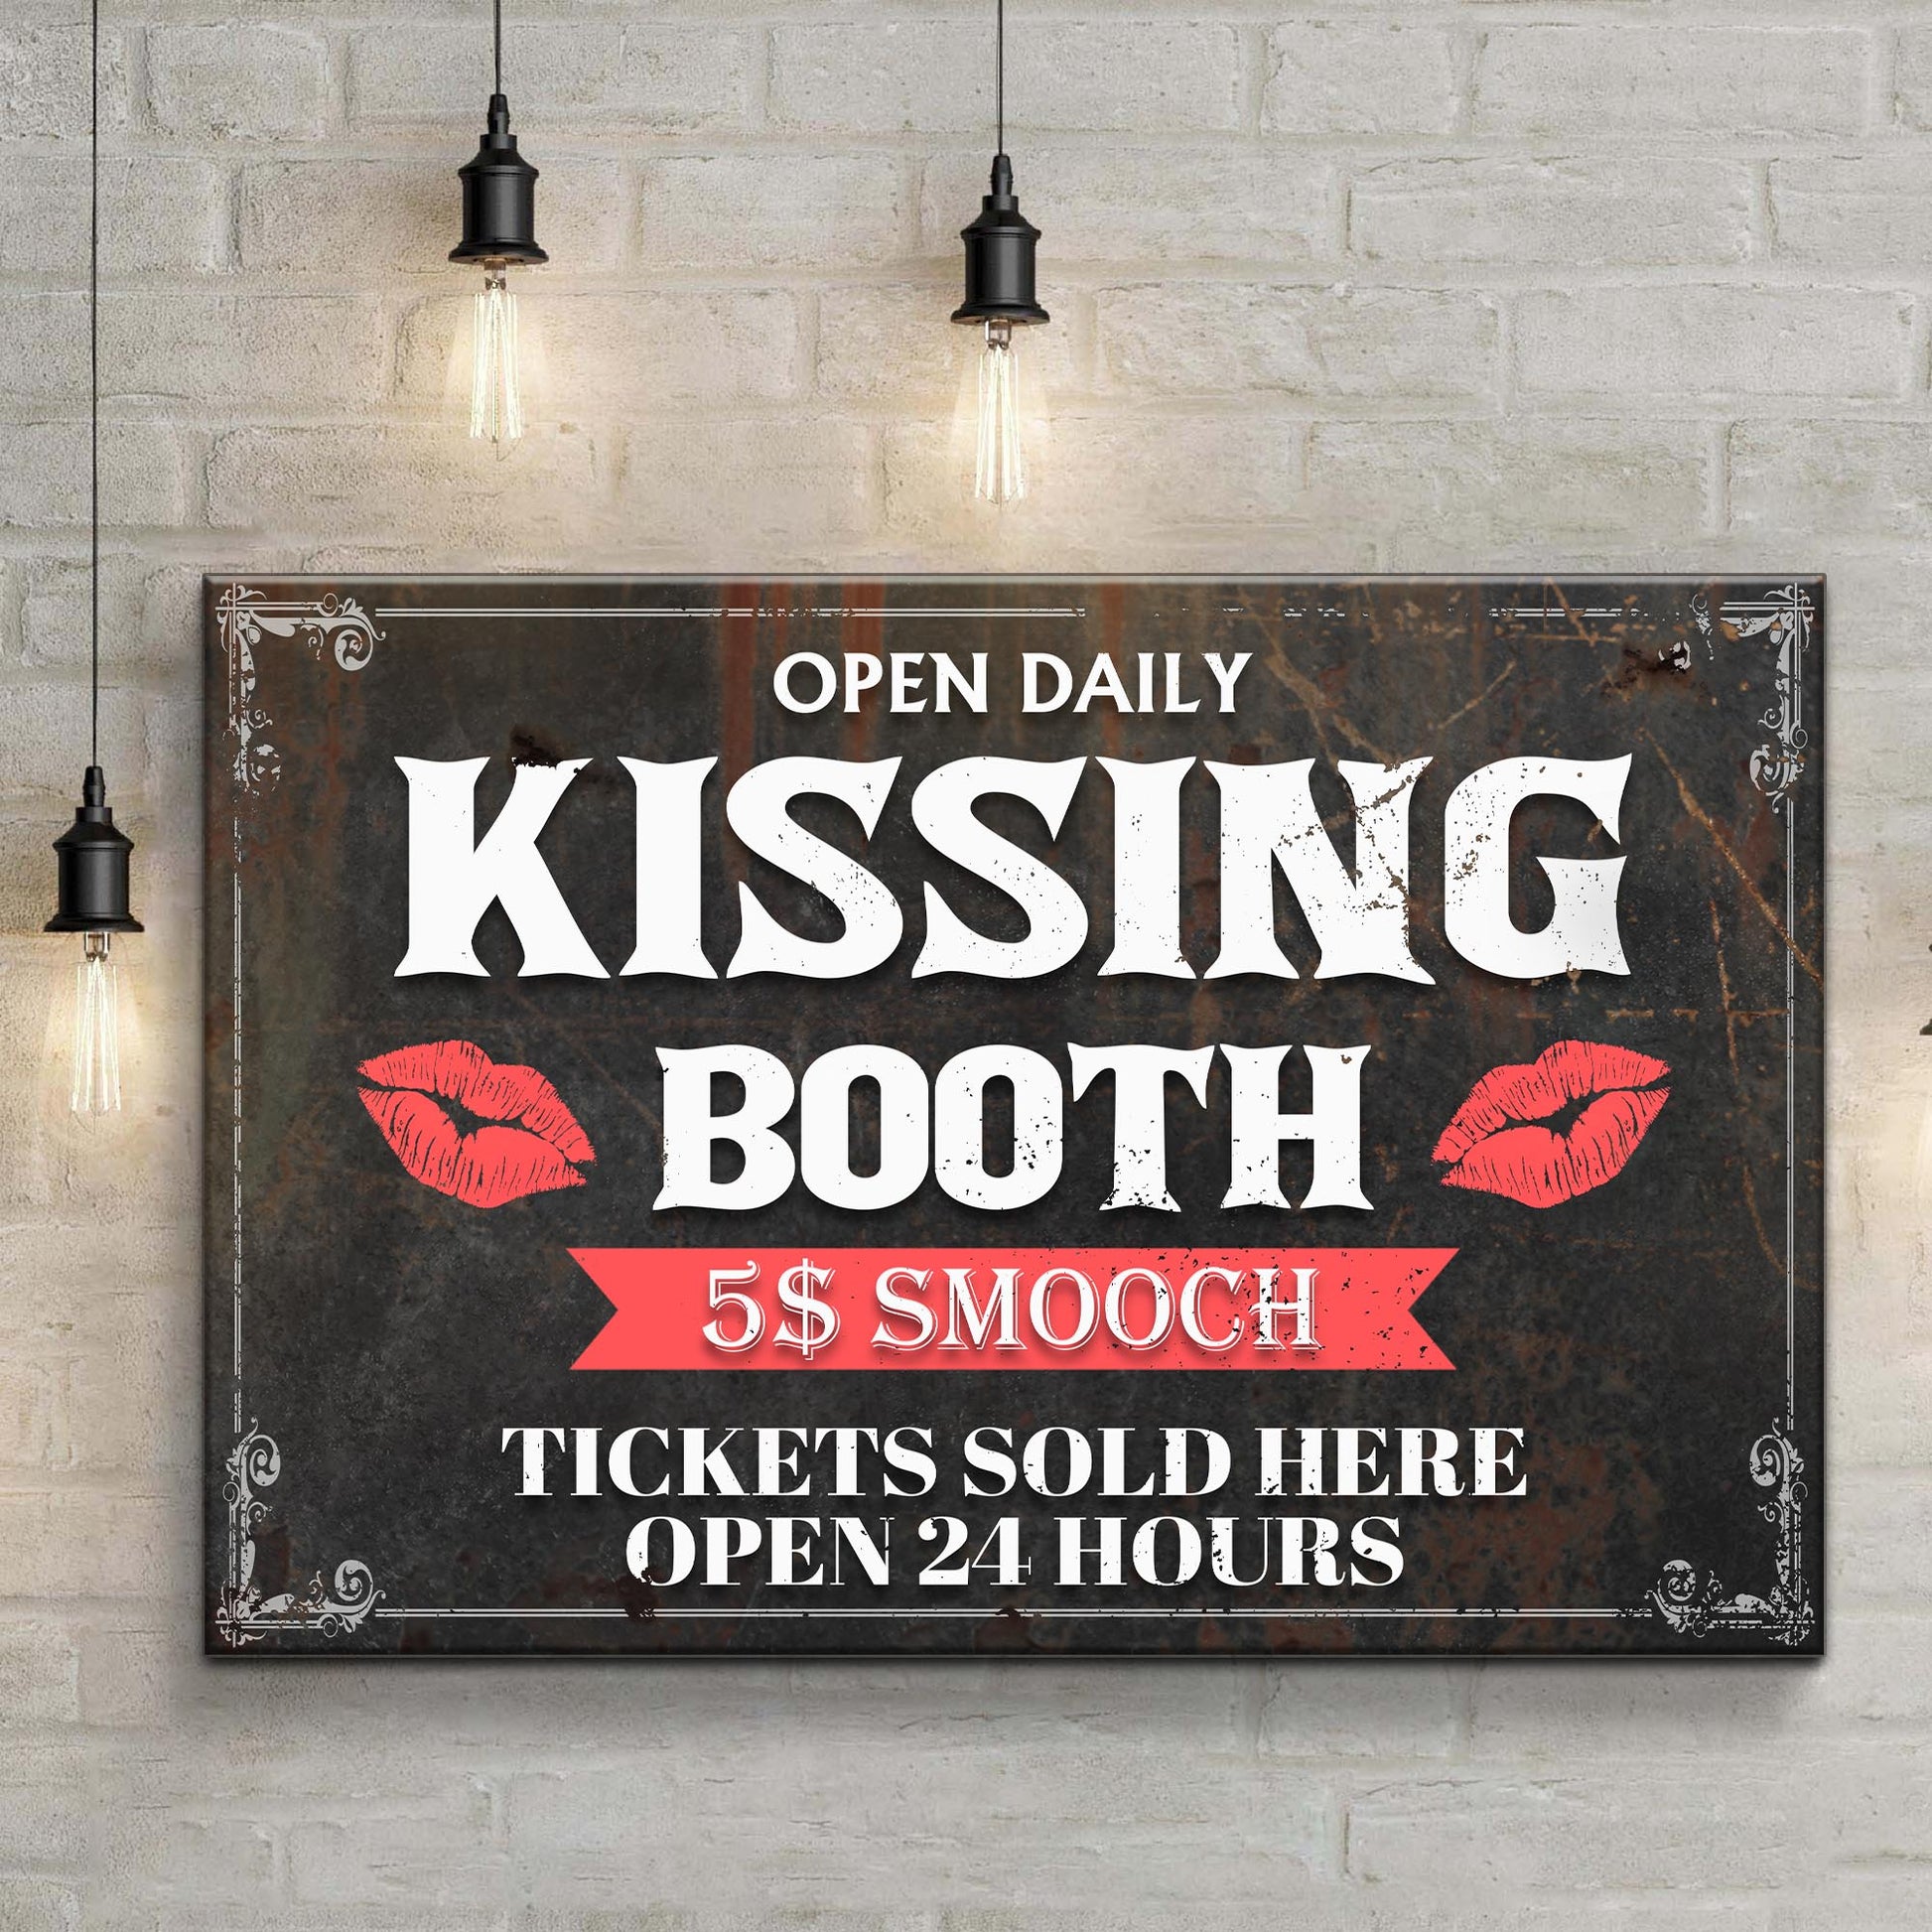 Tickets Sold Here Kissing Booth Sign Style 2 - Image by Tailored Canvases